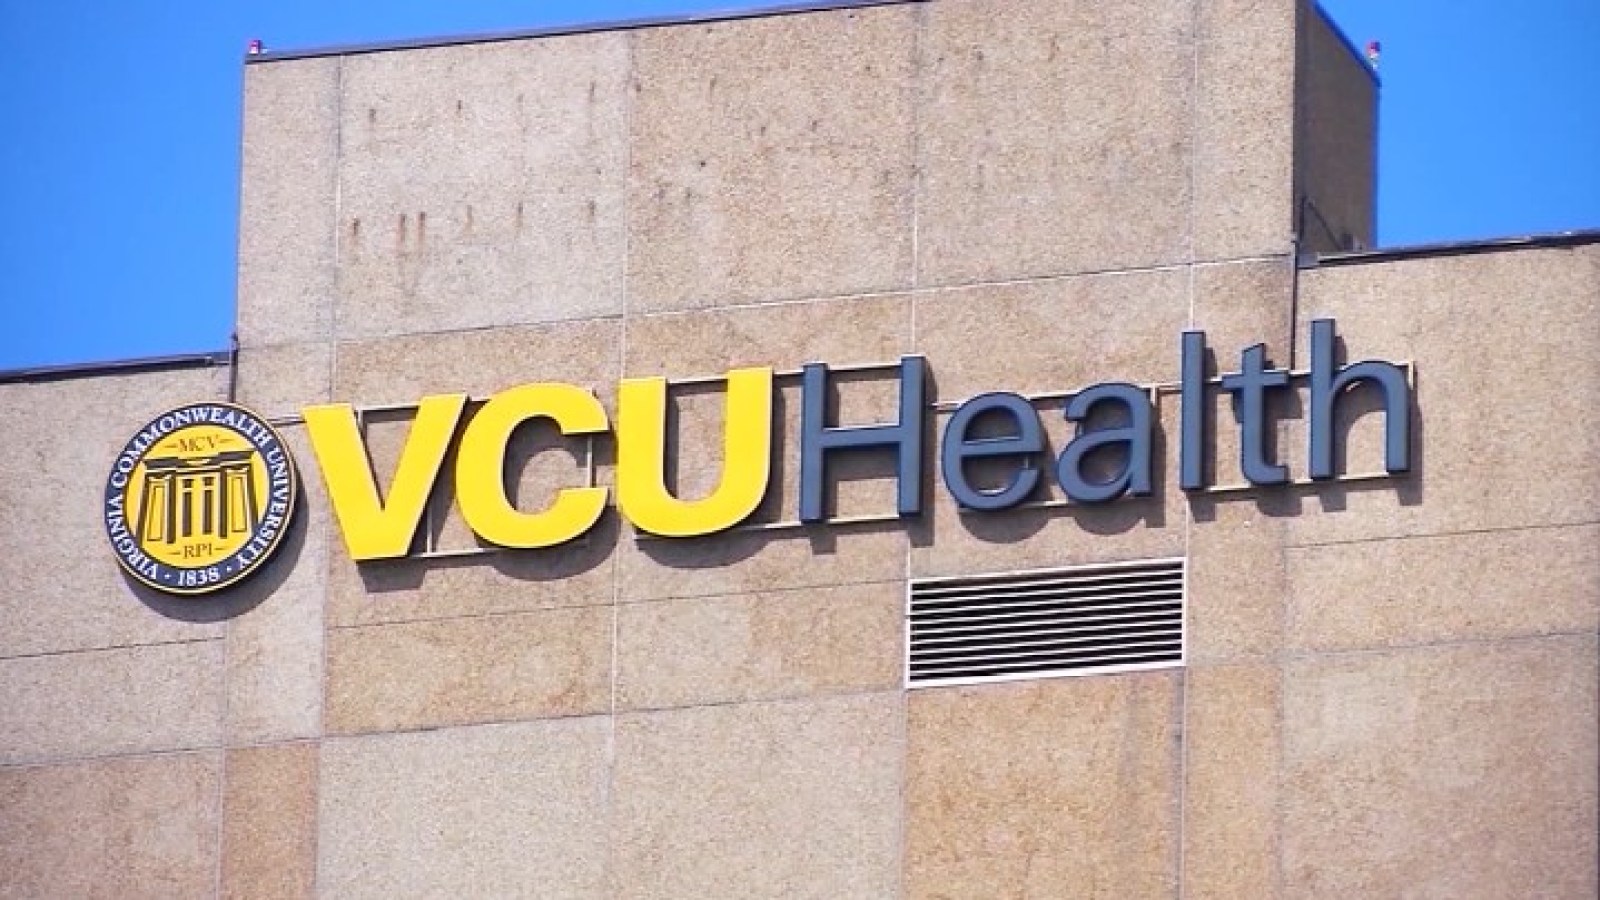 ‘It’s scary’: Shots fired during road rage incident at VCU Health